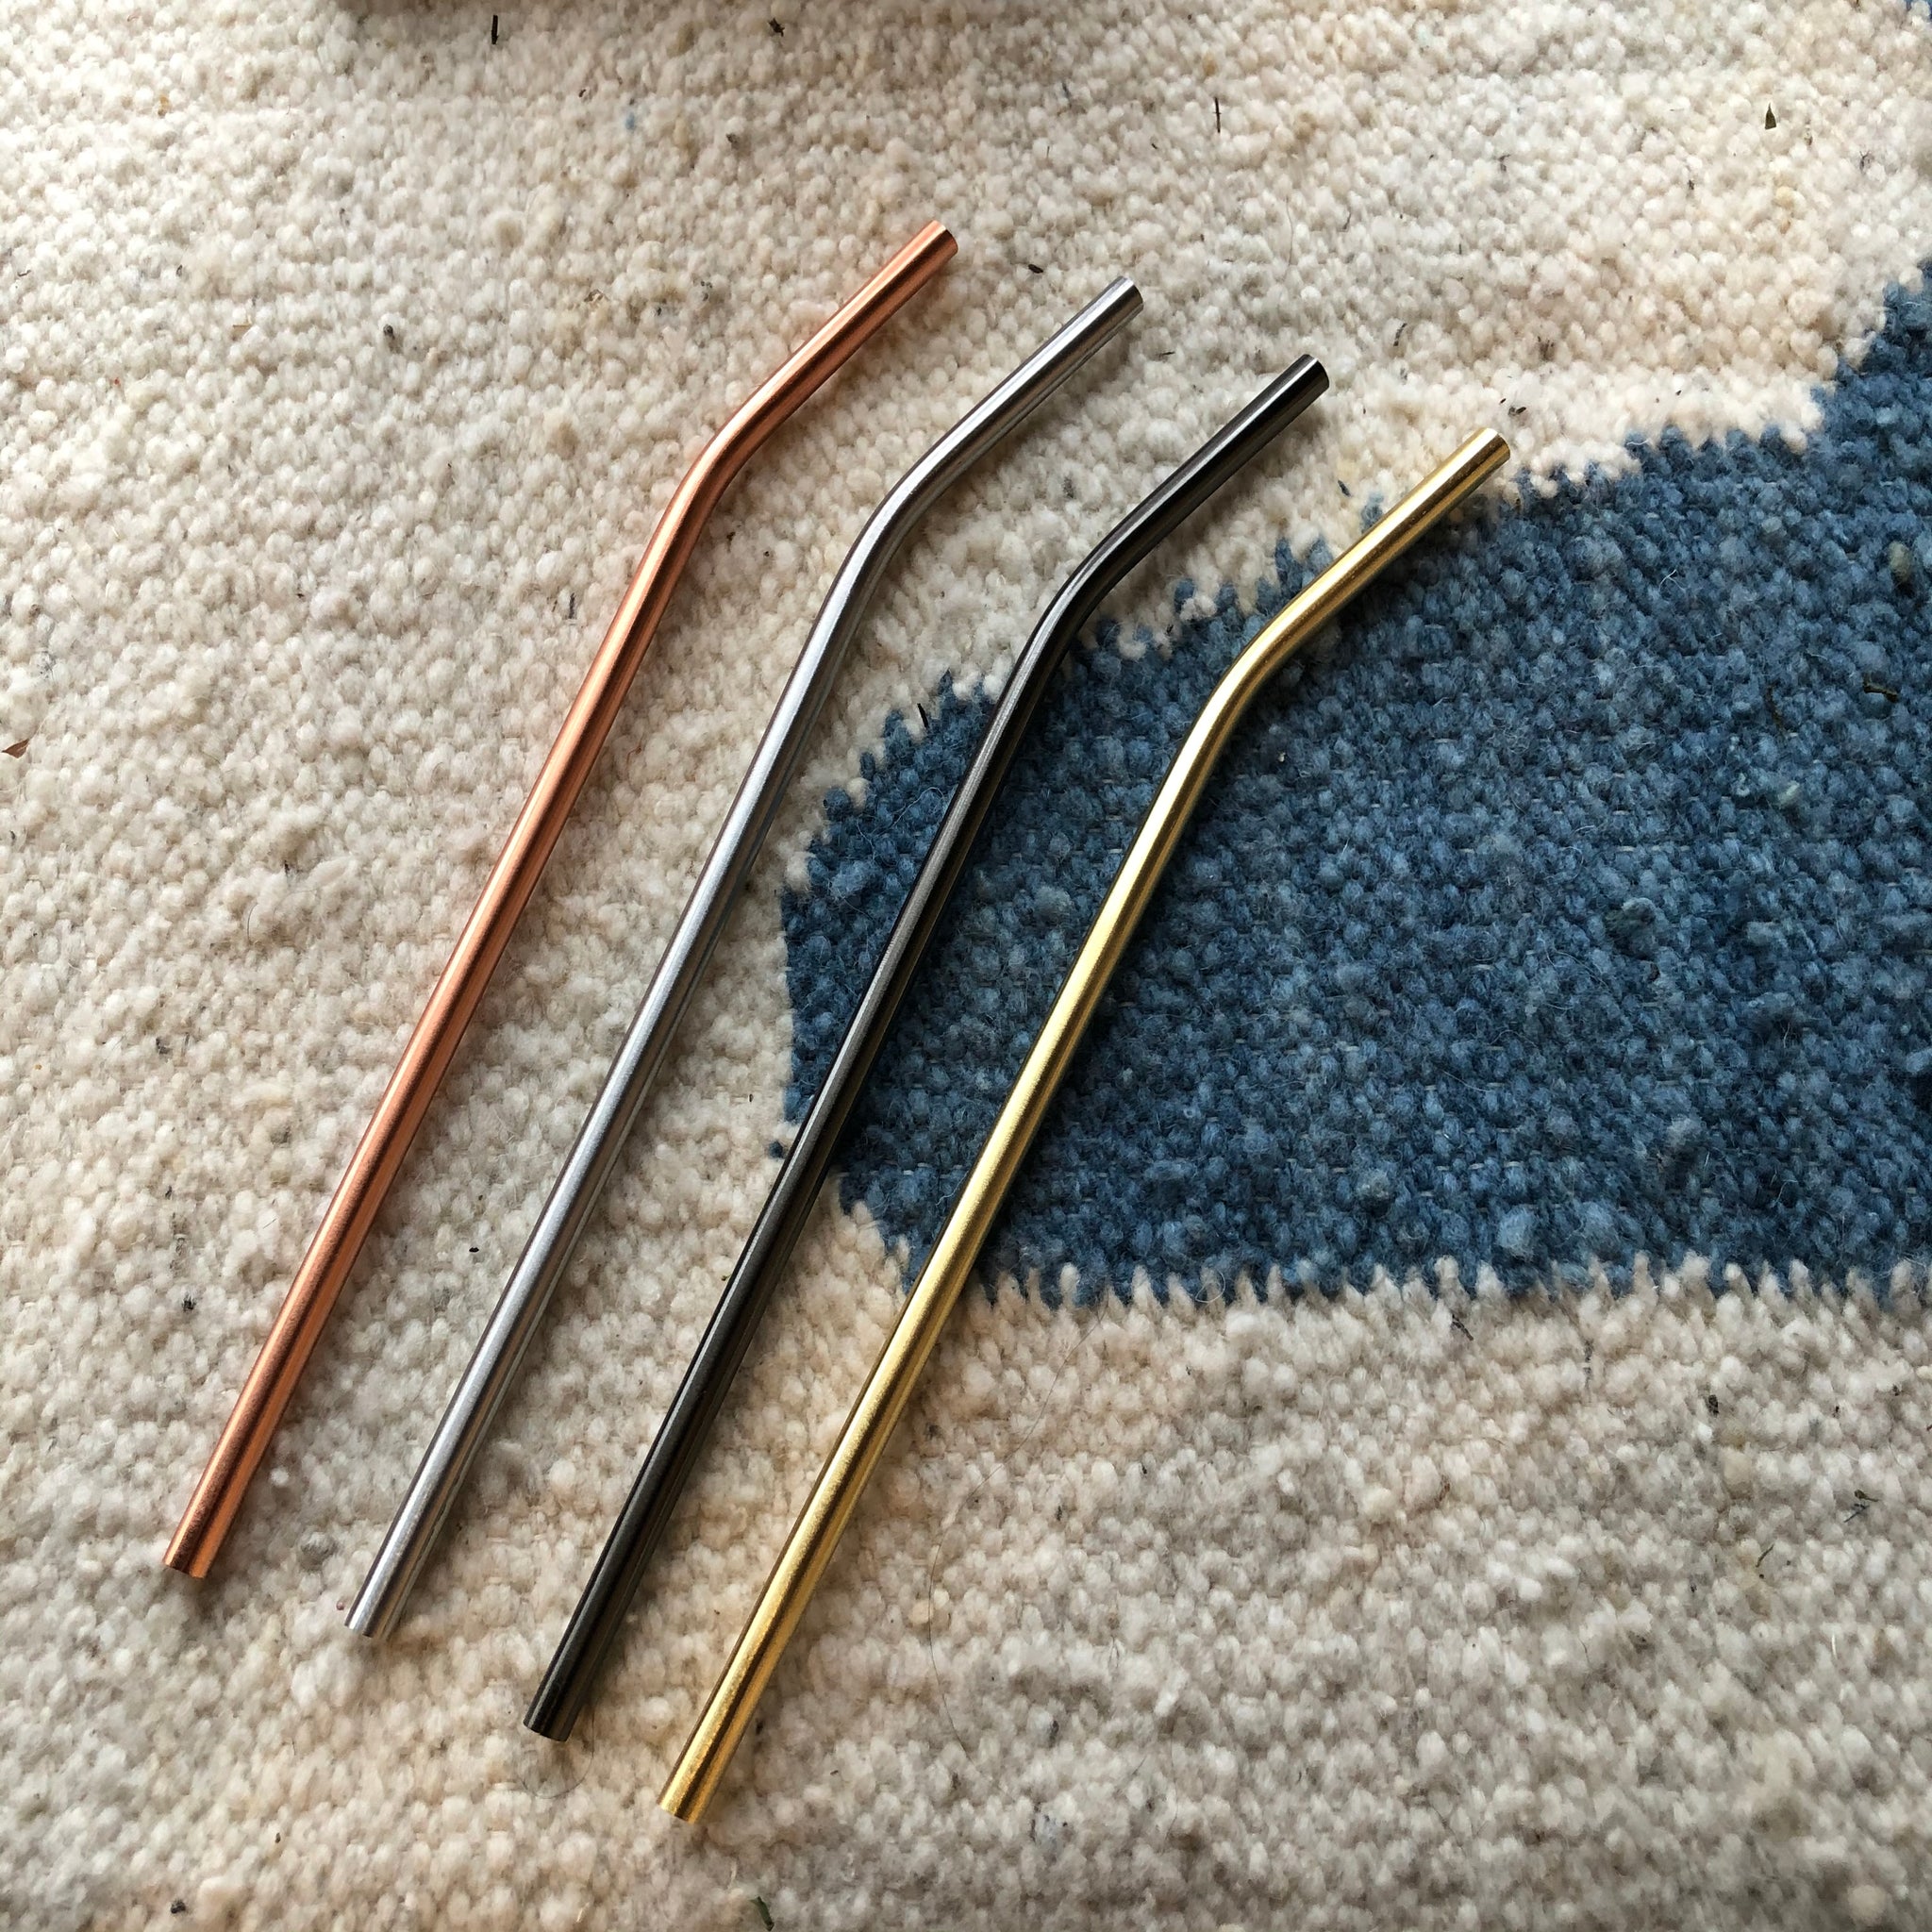 Bent Reusable Stainless Steel Straws - Upstate MN 